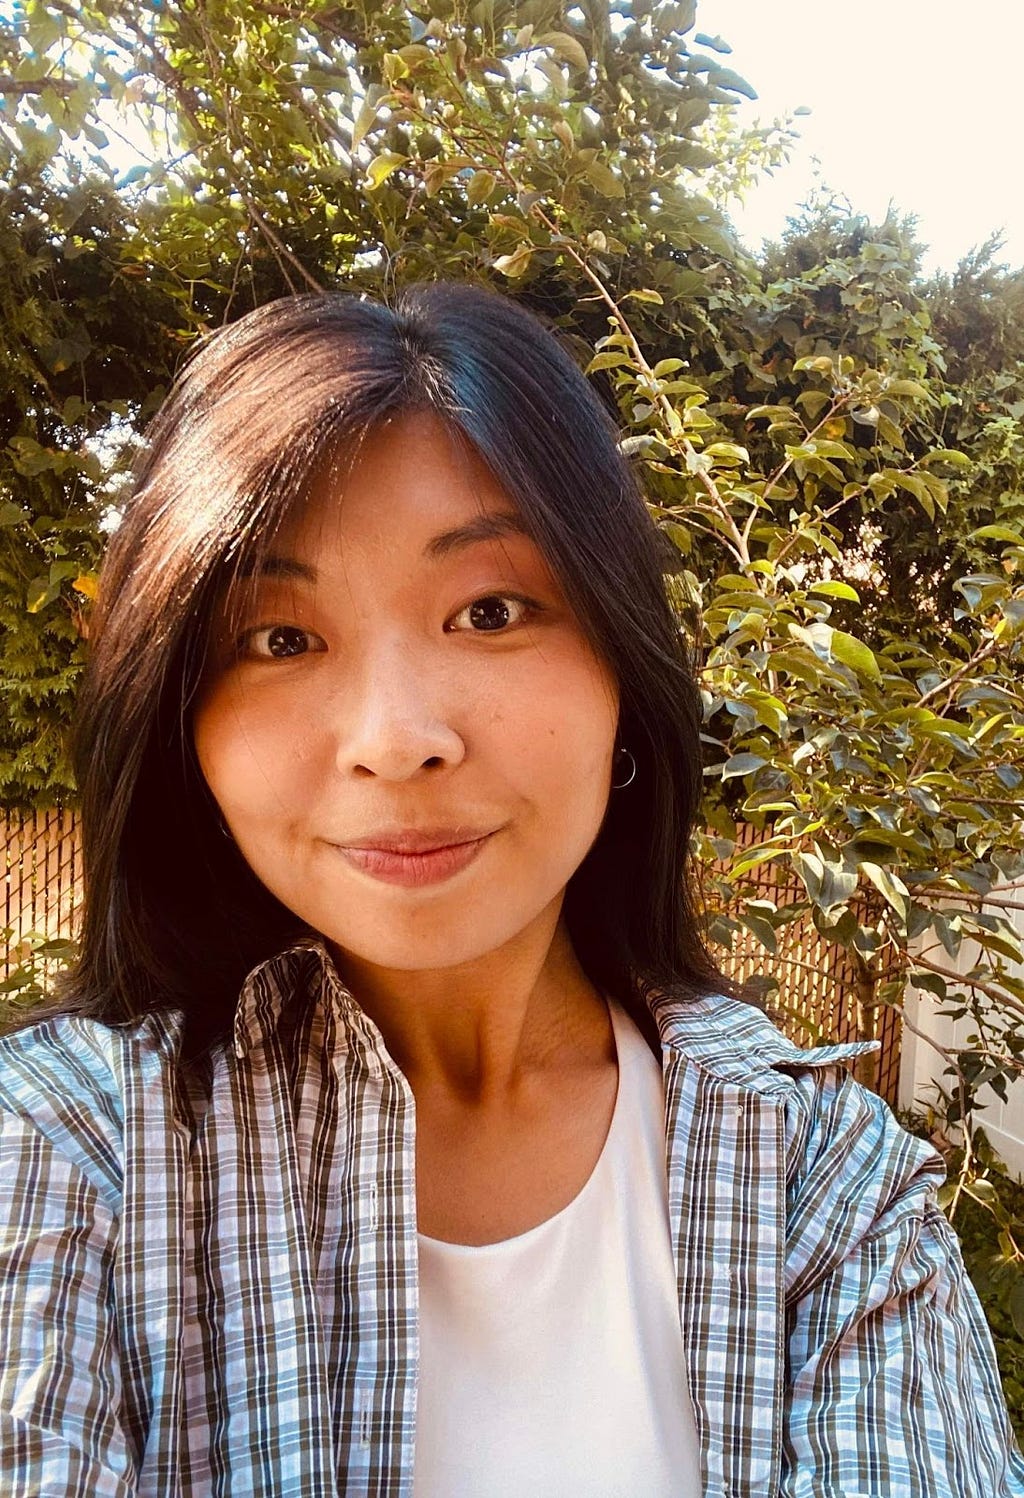 a headshot of Rachel Lim, wearing a blue plaid and white shirt with long black hair. She is smiling in front of a background of sunny fauna and flora.